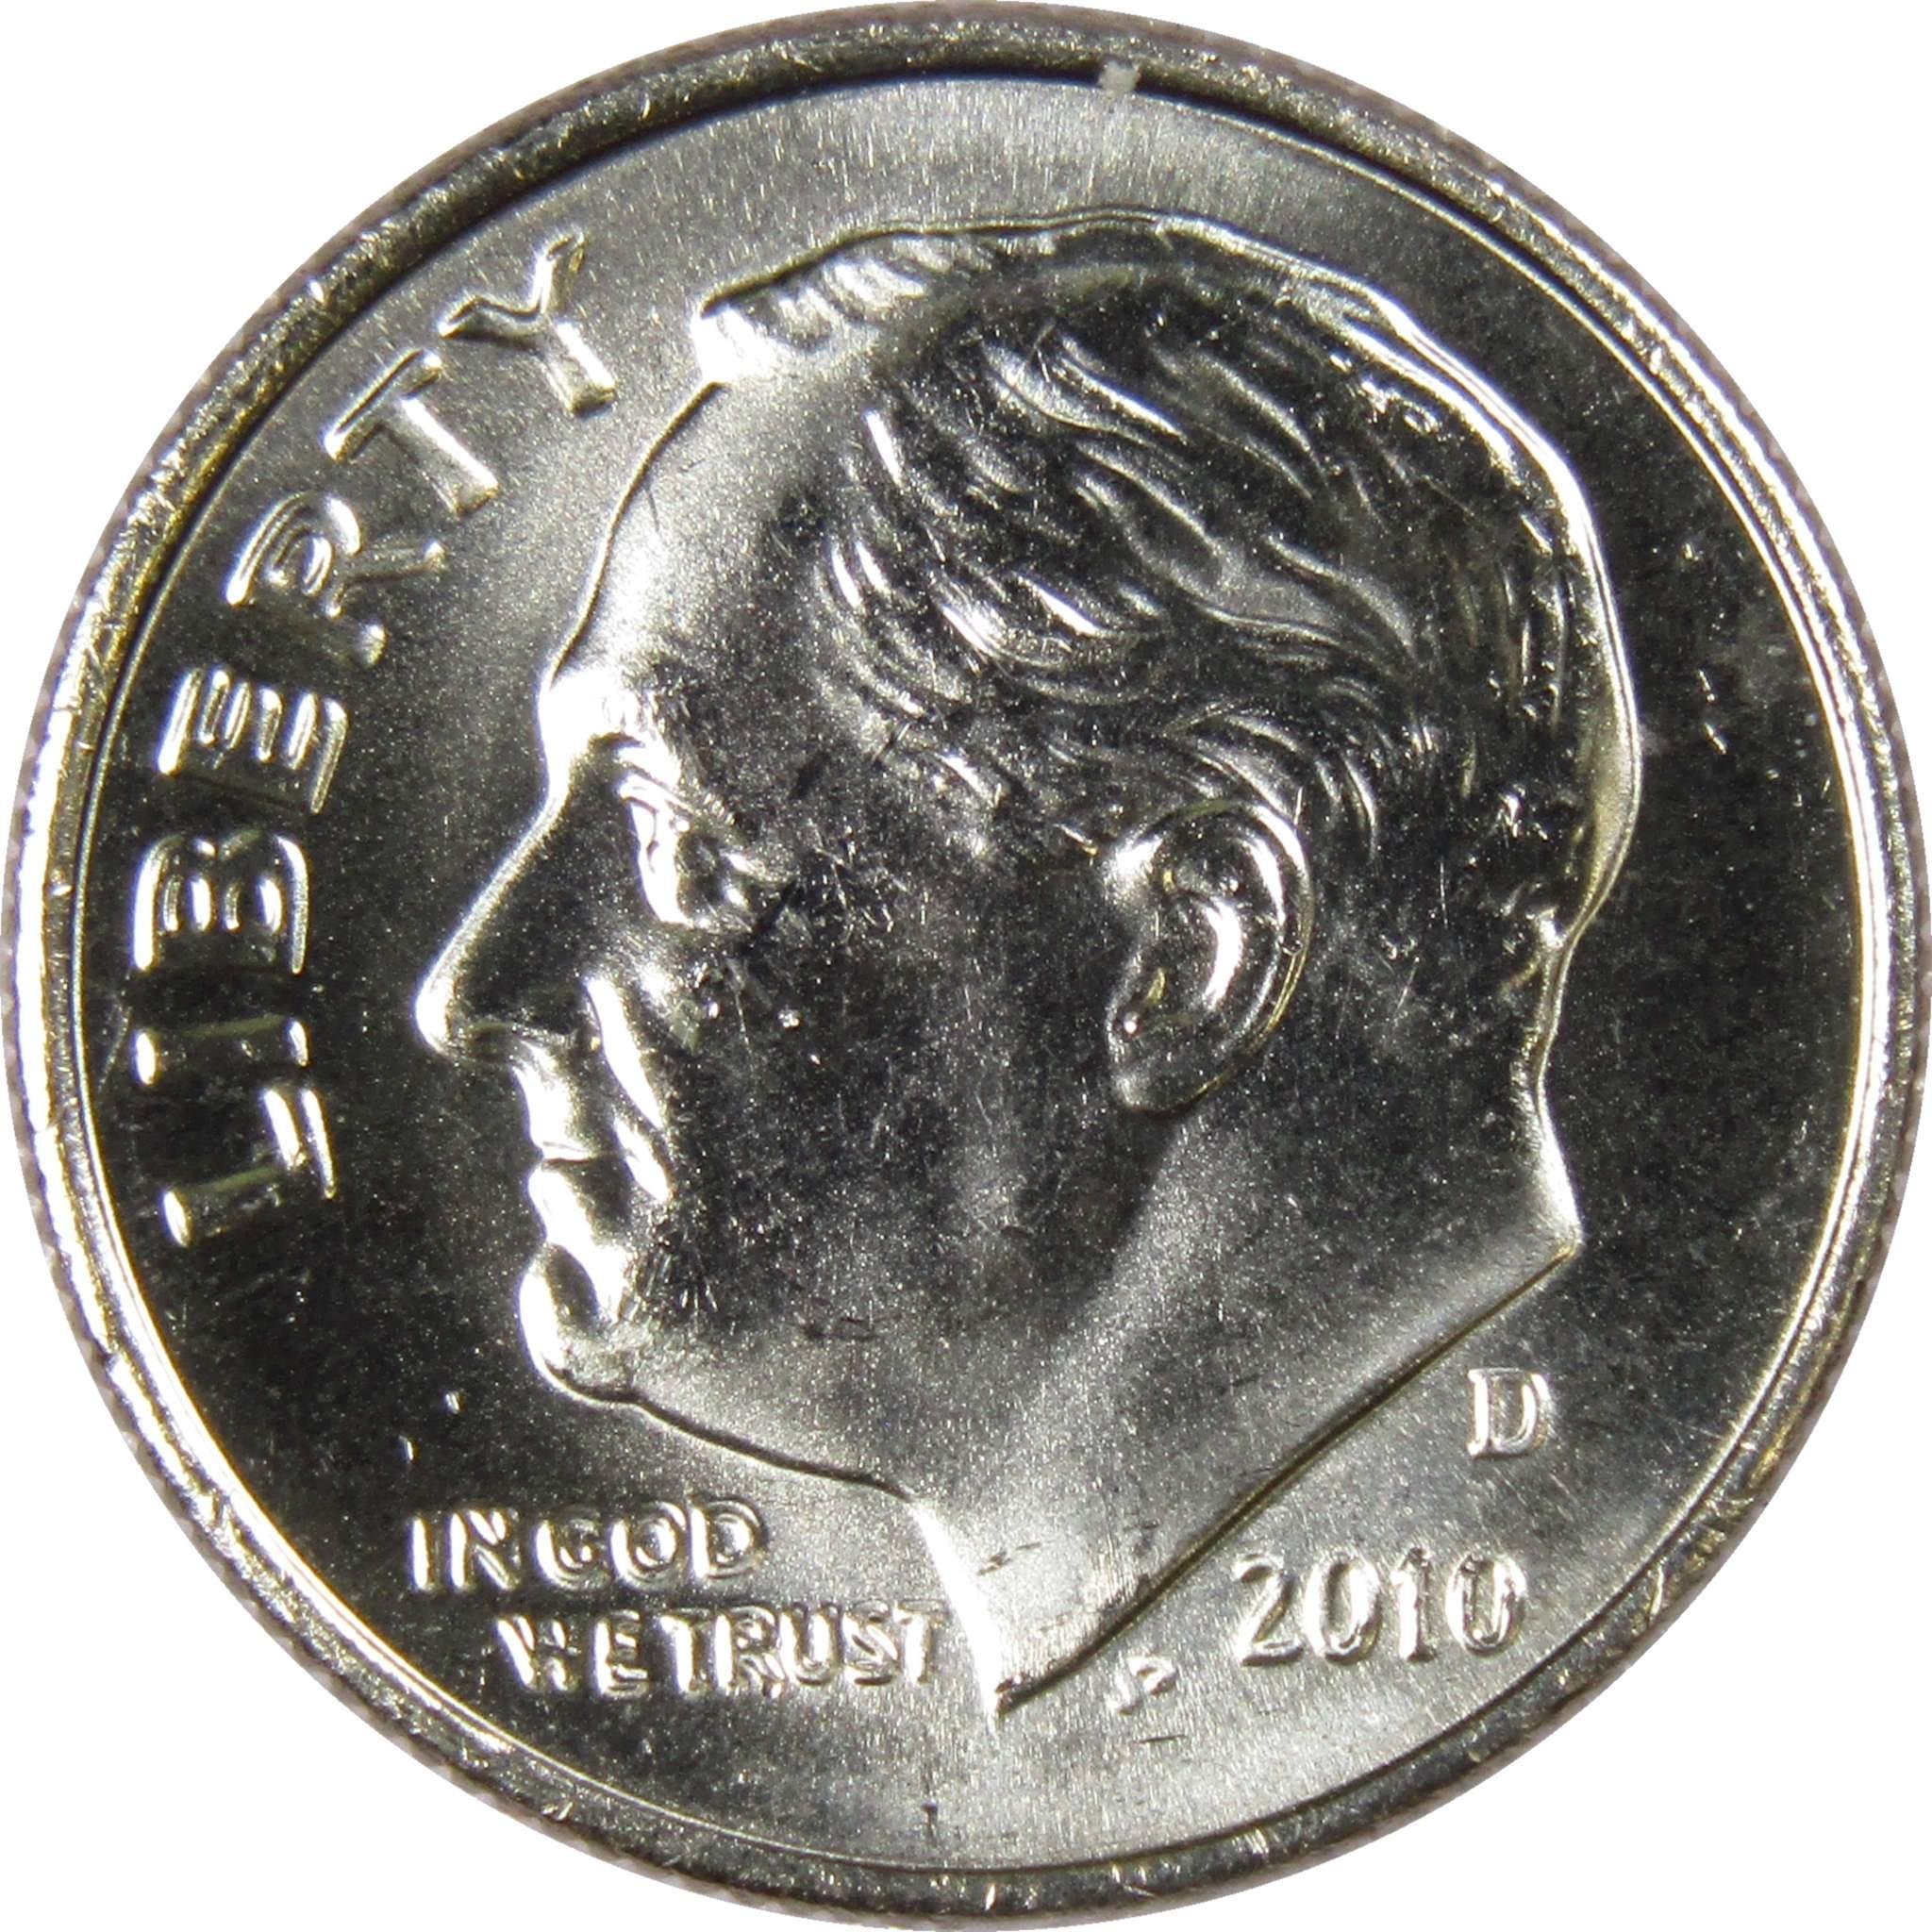 2010 D Roosevelt Dime BU Uncirculated Mint State 10c US Coin Collectible